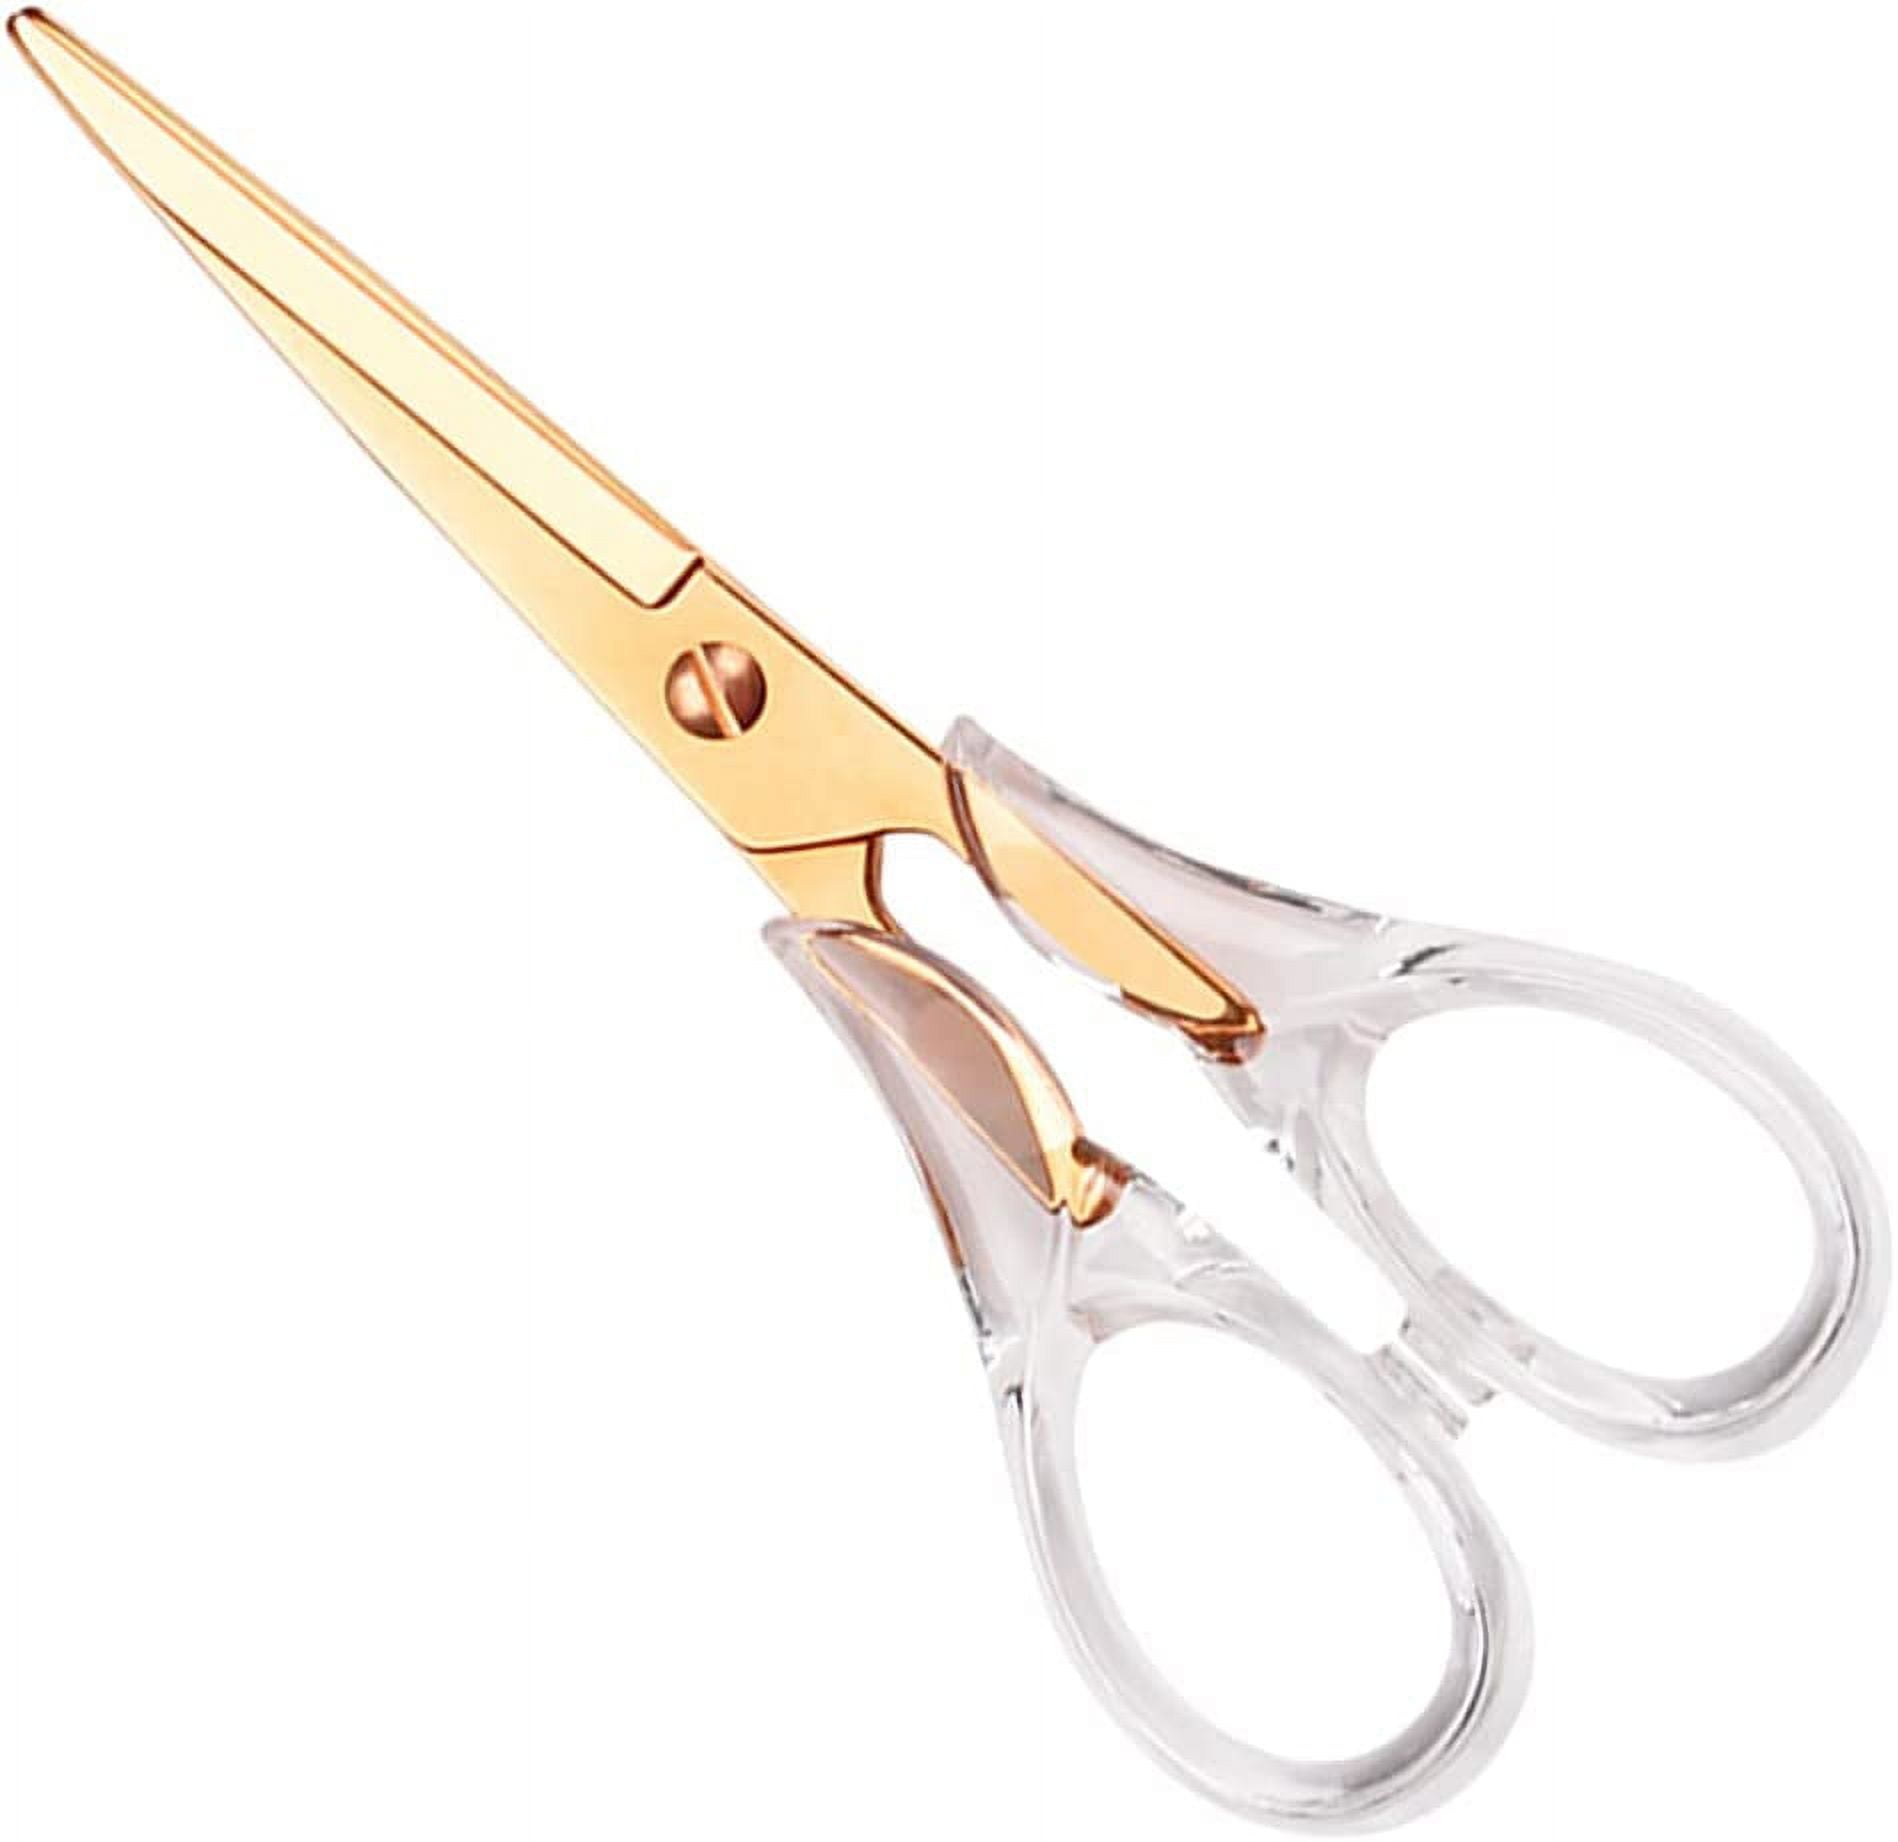 Clear Acrylic Gold Craft Scissors Straight Recycle Stainless Steel Cutting Tool Office Desk Stationery Tailor Sewing Scissors for School N Home